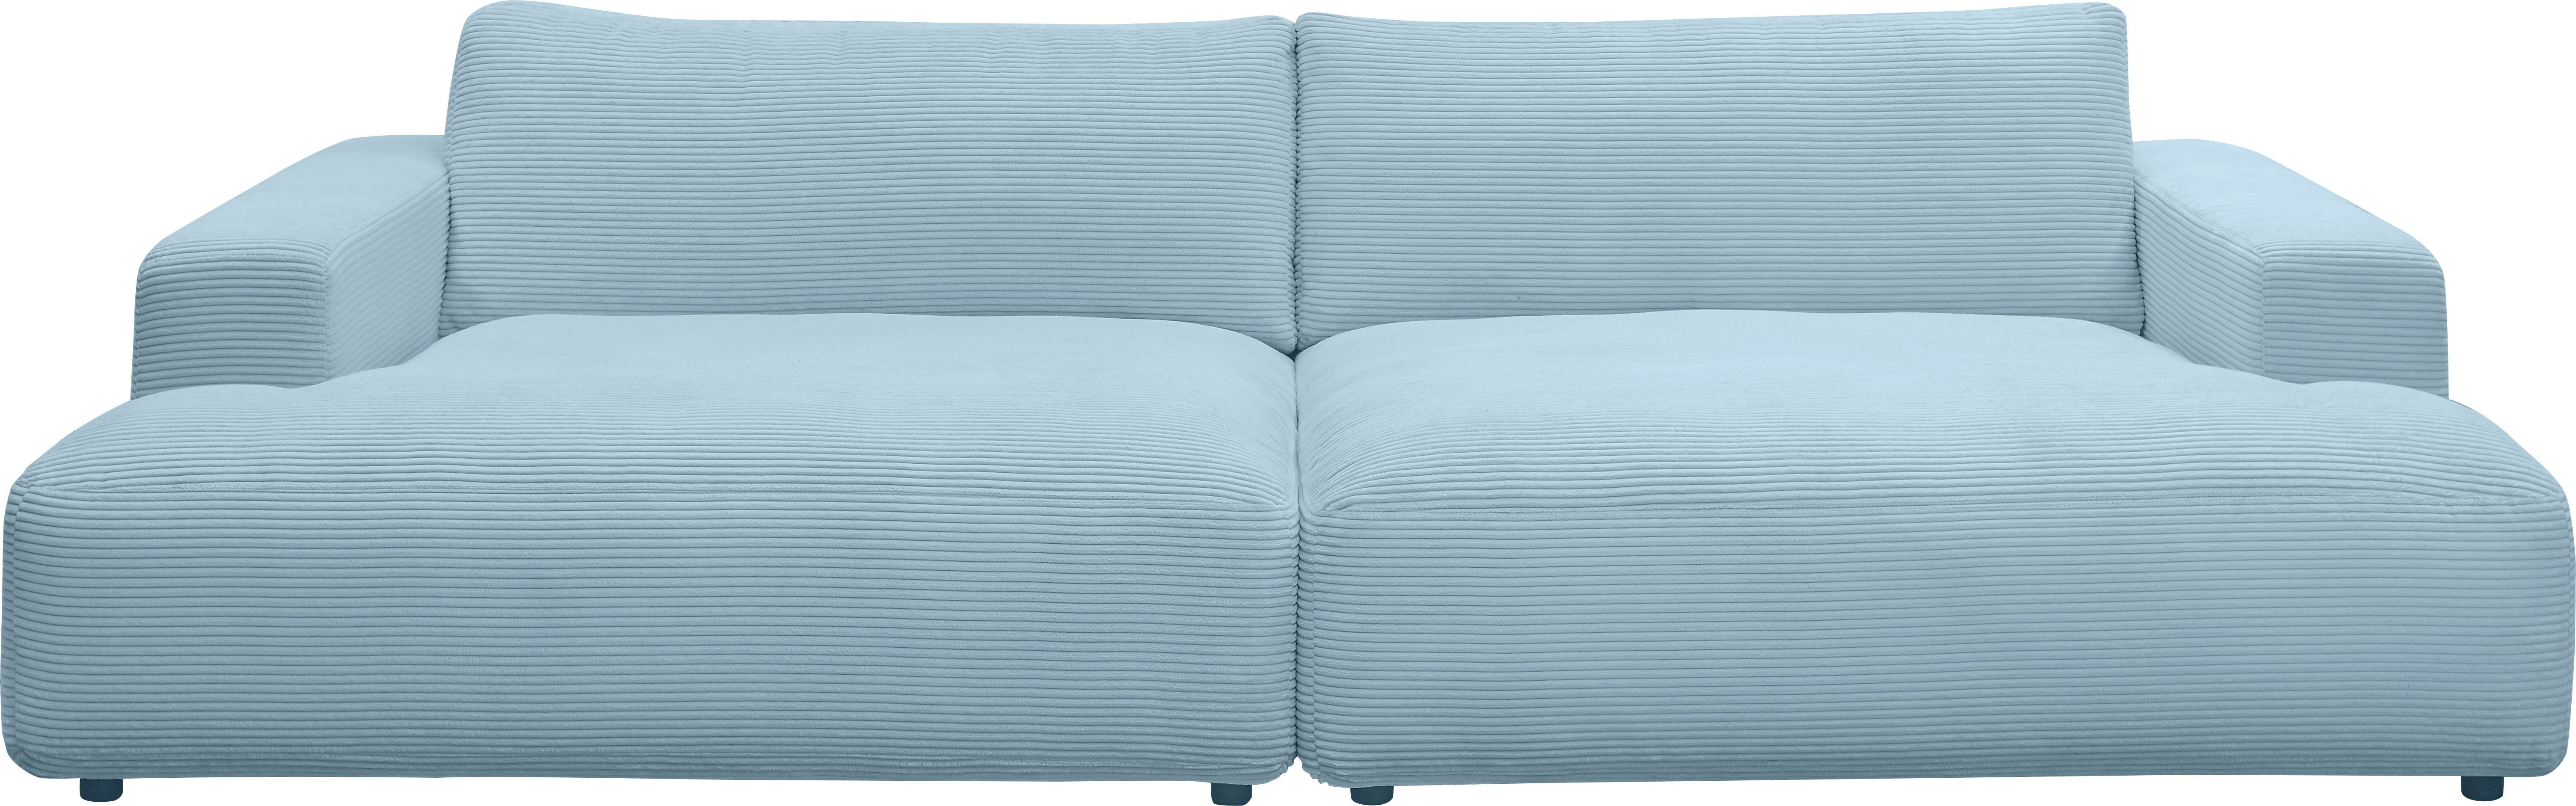 GALLERY M branded Breite Loungesofa by Cord-Bezug, 292 light-blue Musterring cm Lucia